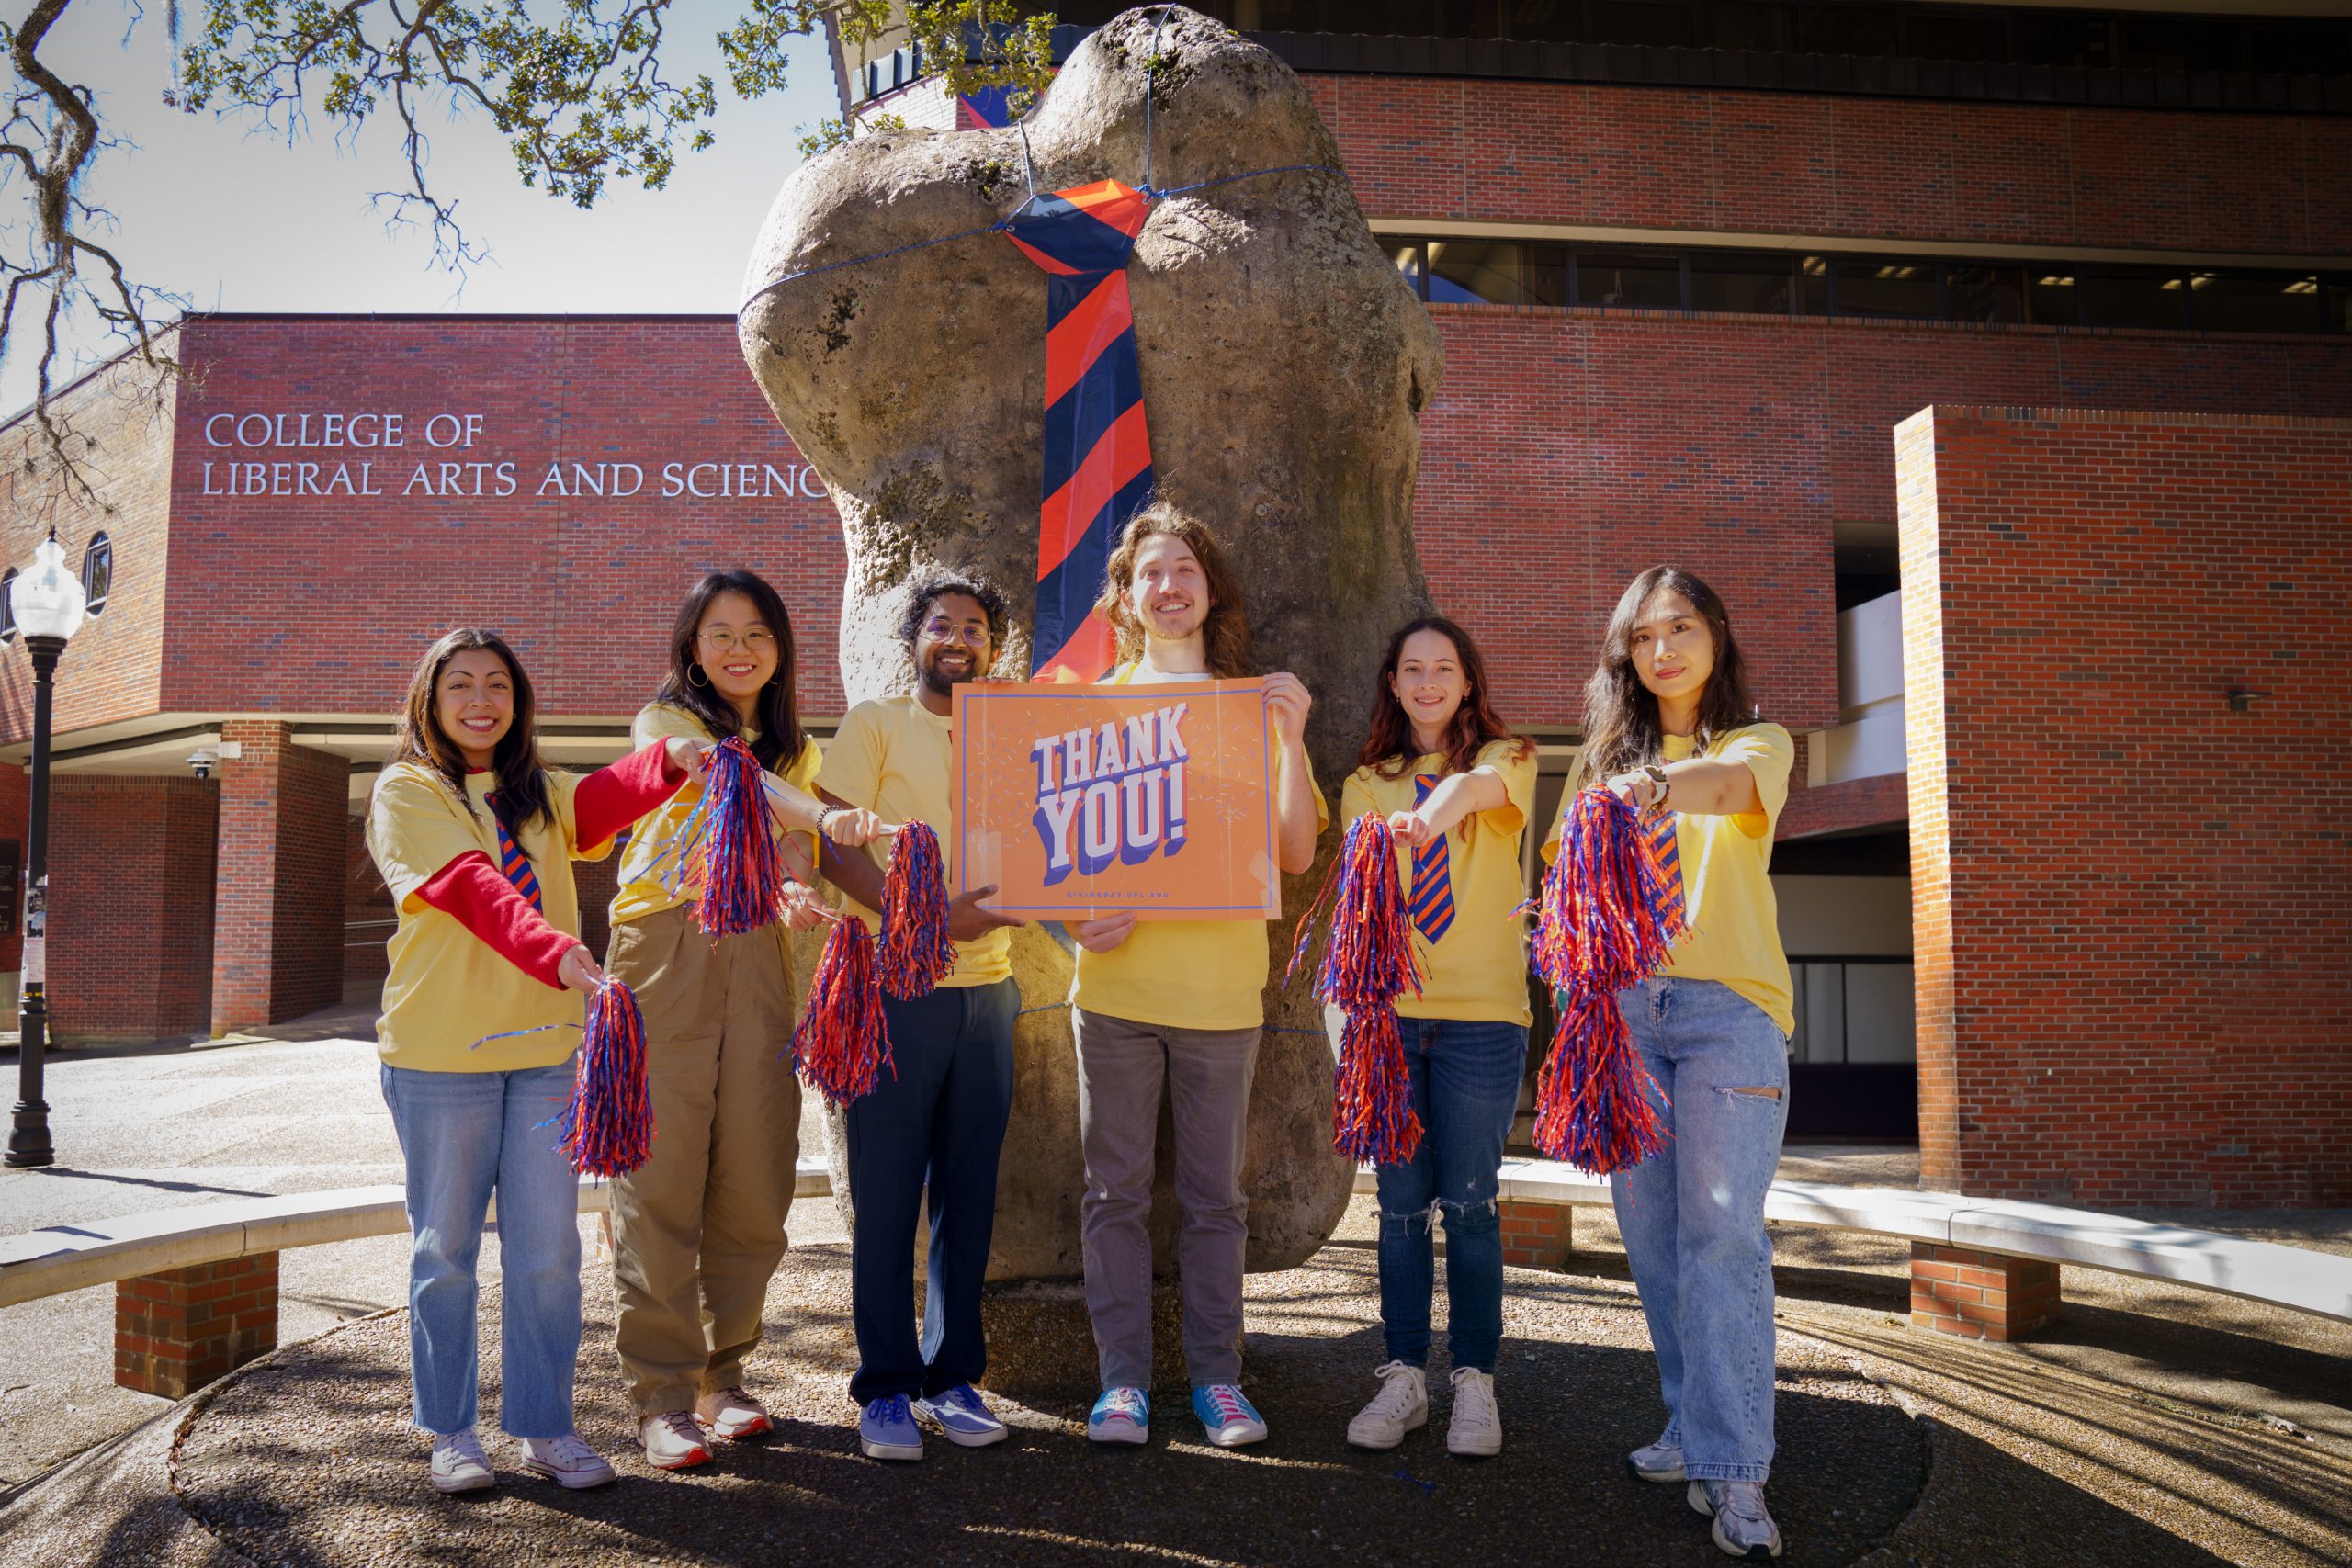 Five students dressed in yellow and the iconic Two Bits tie hold a "Thank You" sign in front of the Turlington rock.